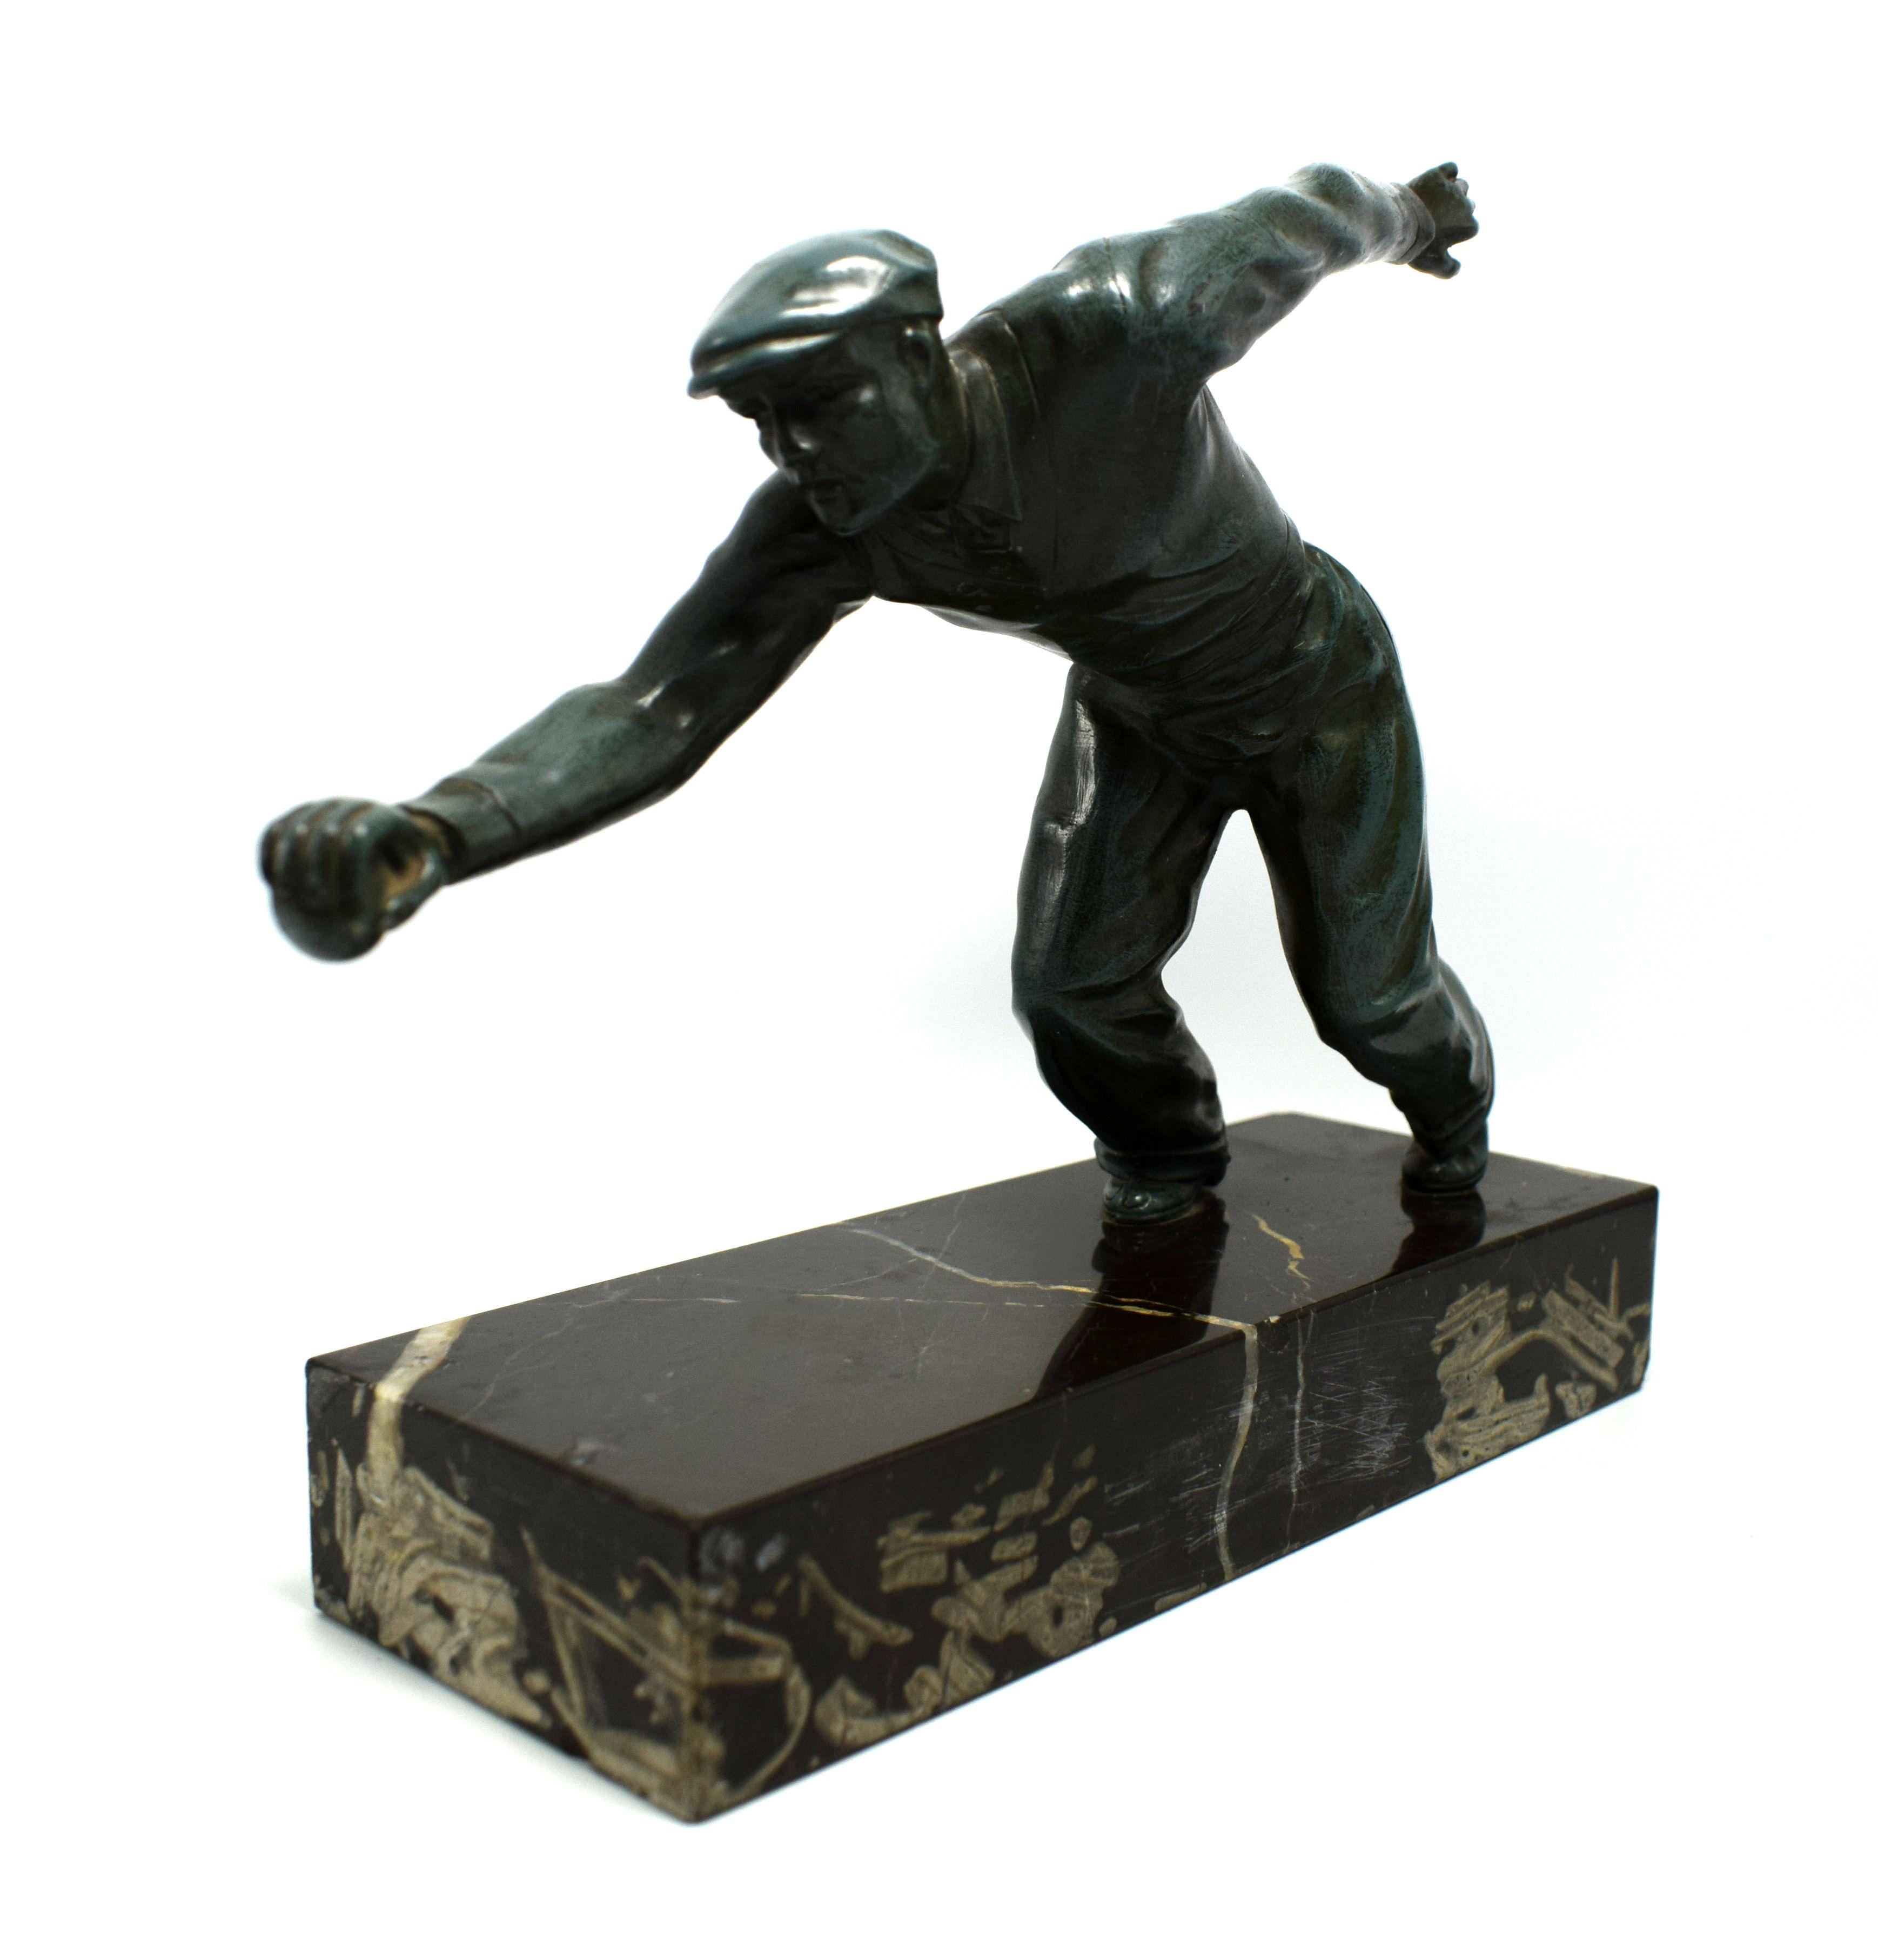 Orinating from France and dated to the 1930s is this wonderful trophy figure of a man mid play in a game of bowls. You don't have to be a fan of sport or bowls for that matter to appreciate this piece. Historically very interesting, just looking at